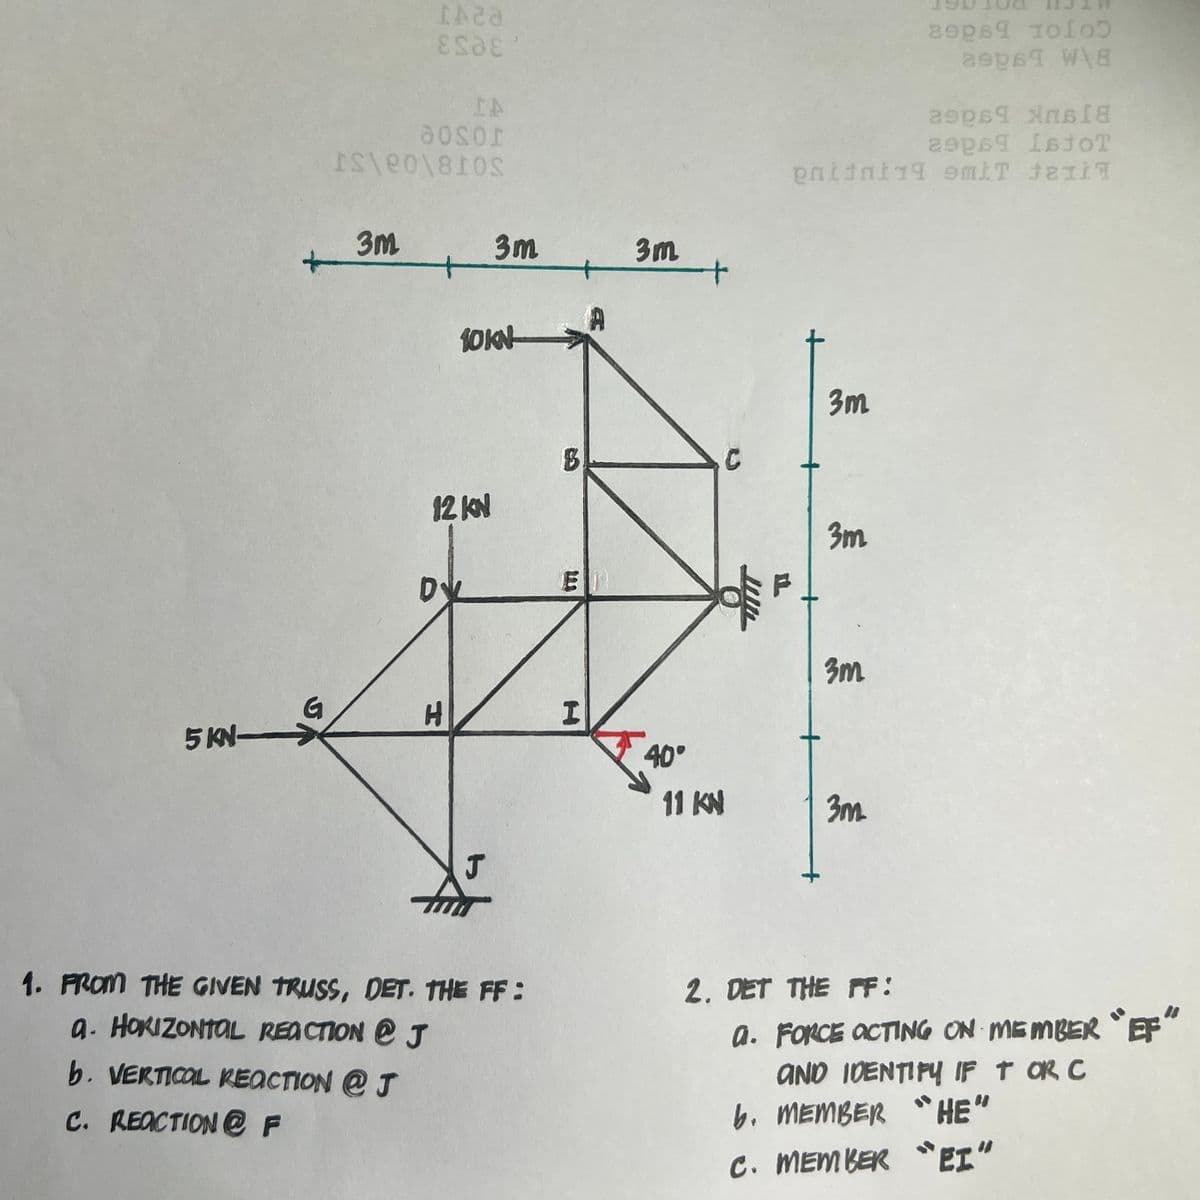 5 KN-
G
IA20
ESDE
IA
aosor
IS\e0\810S
3m
+
D
12 KN
H
10KN
3m
J
1. FROM THE GIVEN TRUSS, DET. THE FF:
a. HORIZONTAL REACTION @ J
b. VERTICAL REACTION @ J
C. REACTION @ F
B
E
I
3m
40°
11 KN
asps¶ xns18
asps IstoT
pniini19 emit Jalil
3m
3m
3m
3m
2006 1005
asps¶ W\8
2. DET THE FF:
a. FORCE ACTING ON MEMBER "EF"
AND IDENTIFY IF T OR C
"HE"
b. MEMBER
C. MEMBER "EI"